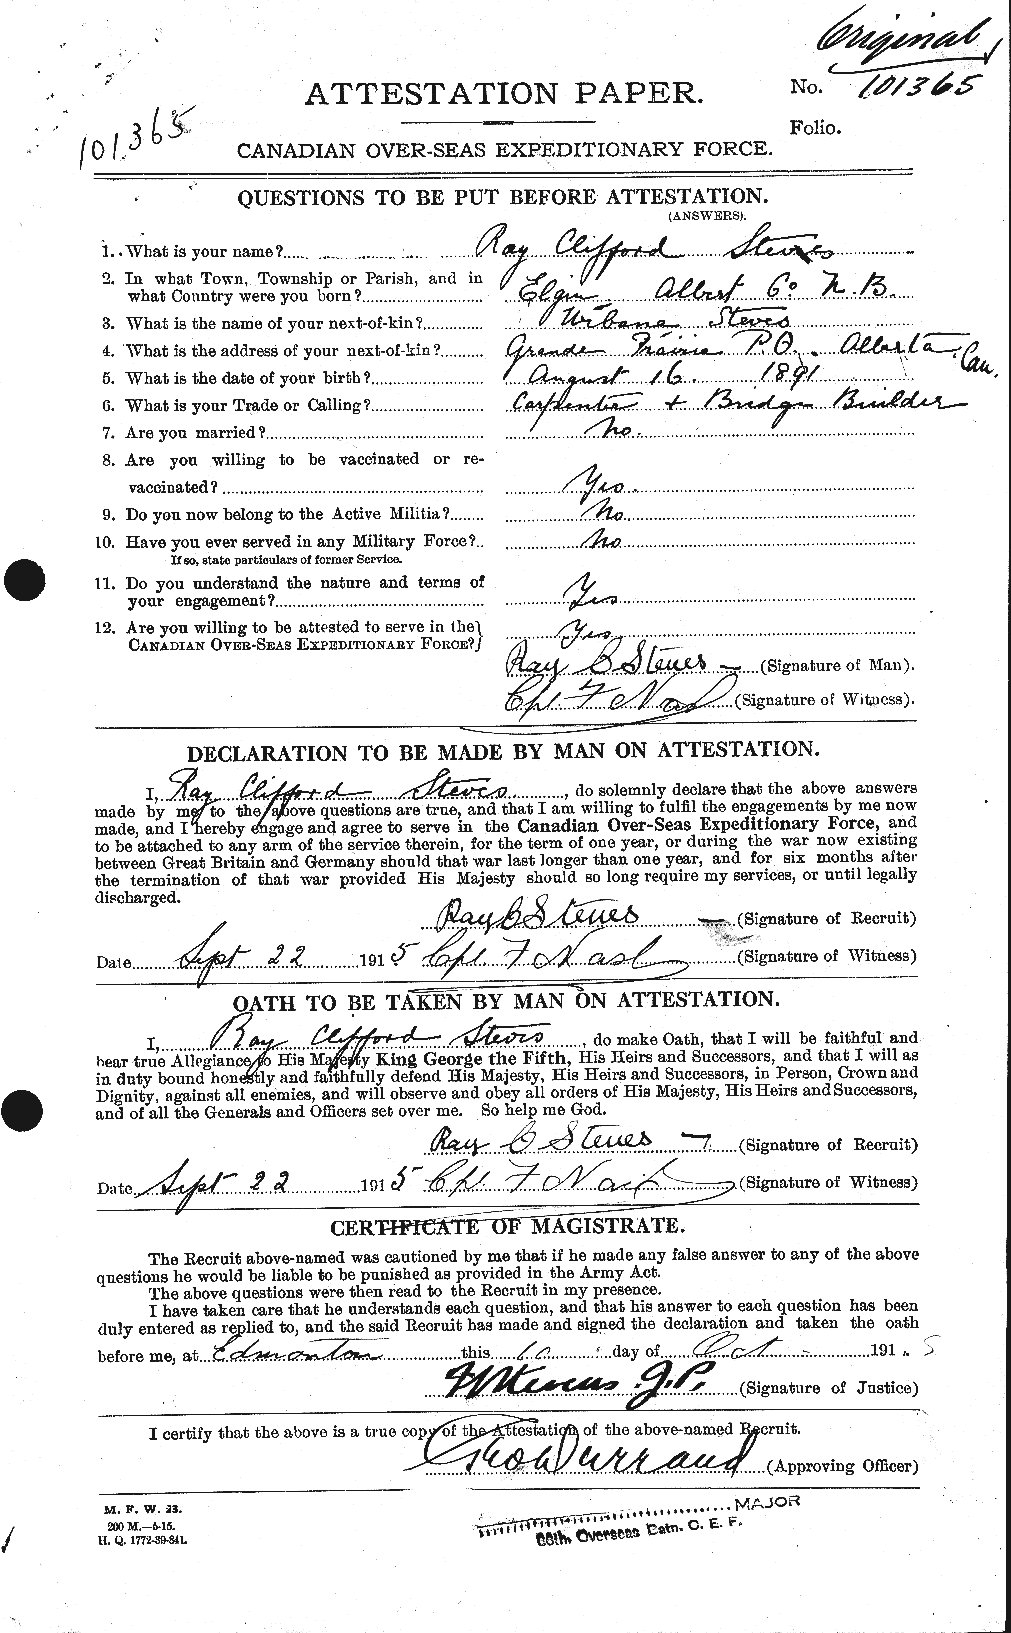 Personnel Records of the First World War - CEF 118752a